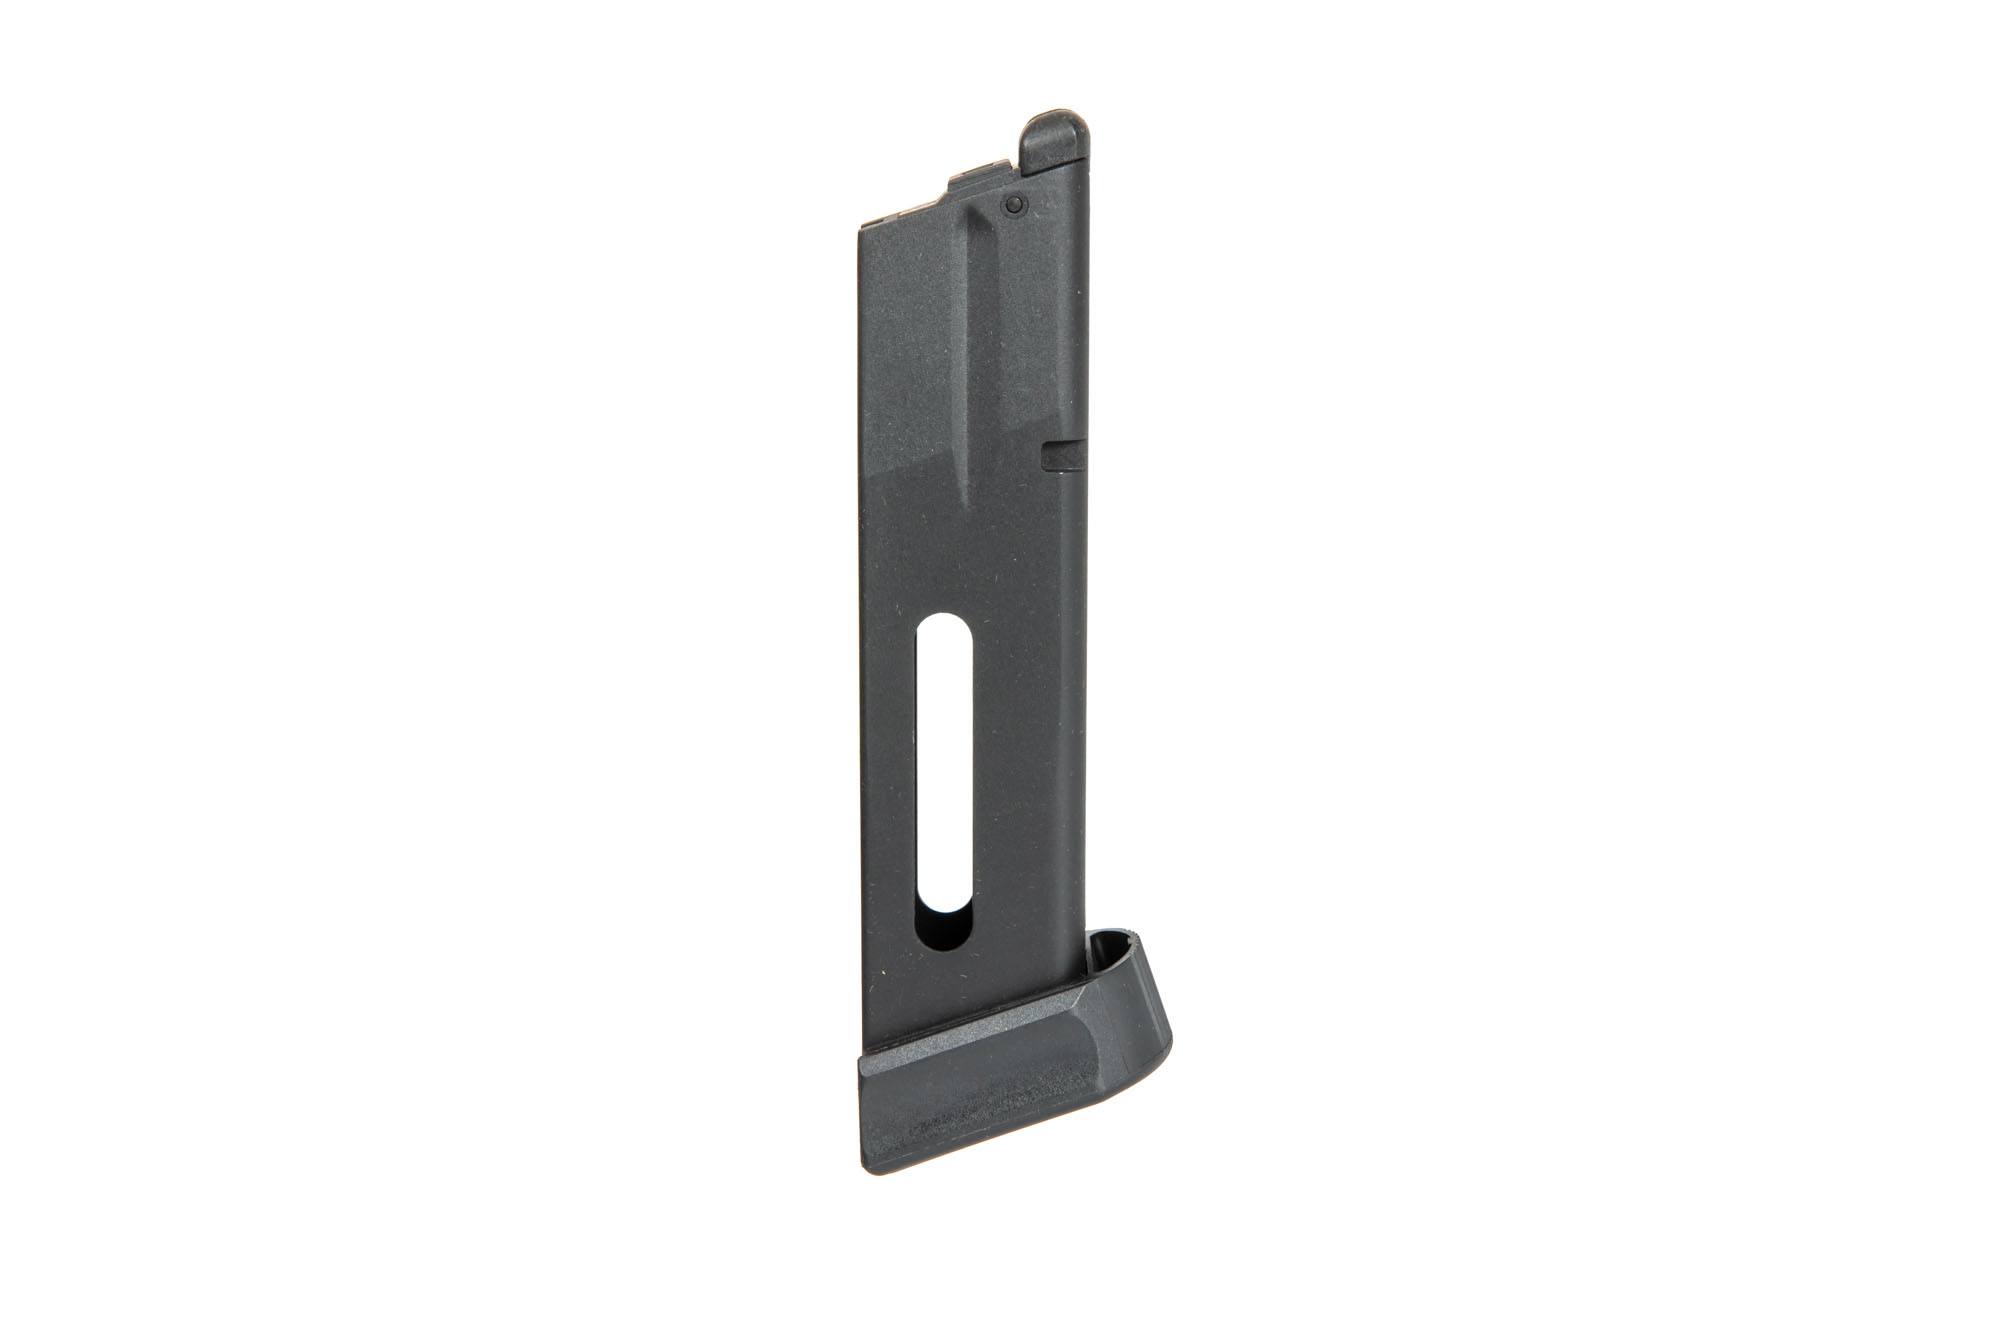 26BBs CO2 ASG magazine for USW-A1 GBB by ASG on Airsoft Mania Europe